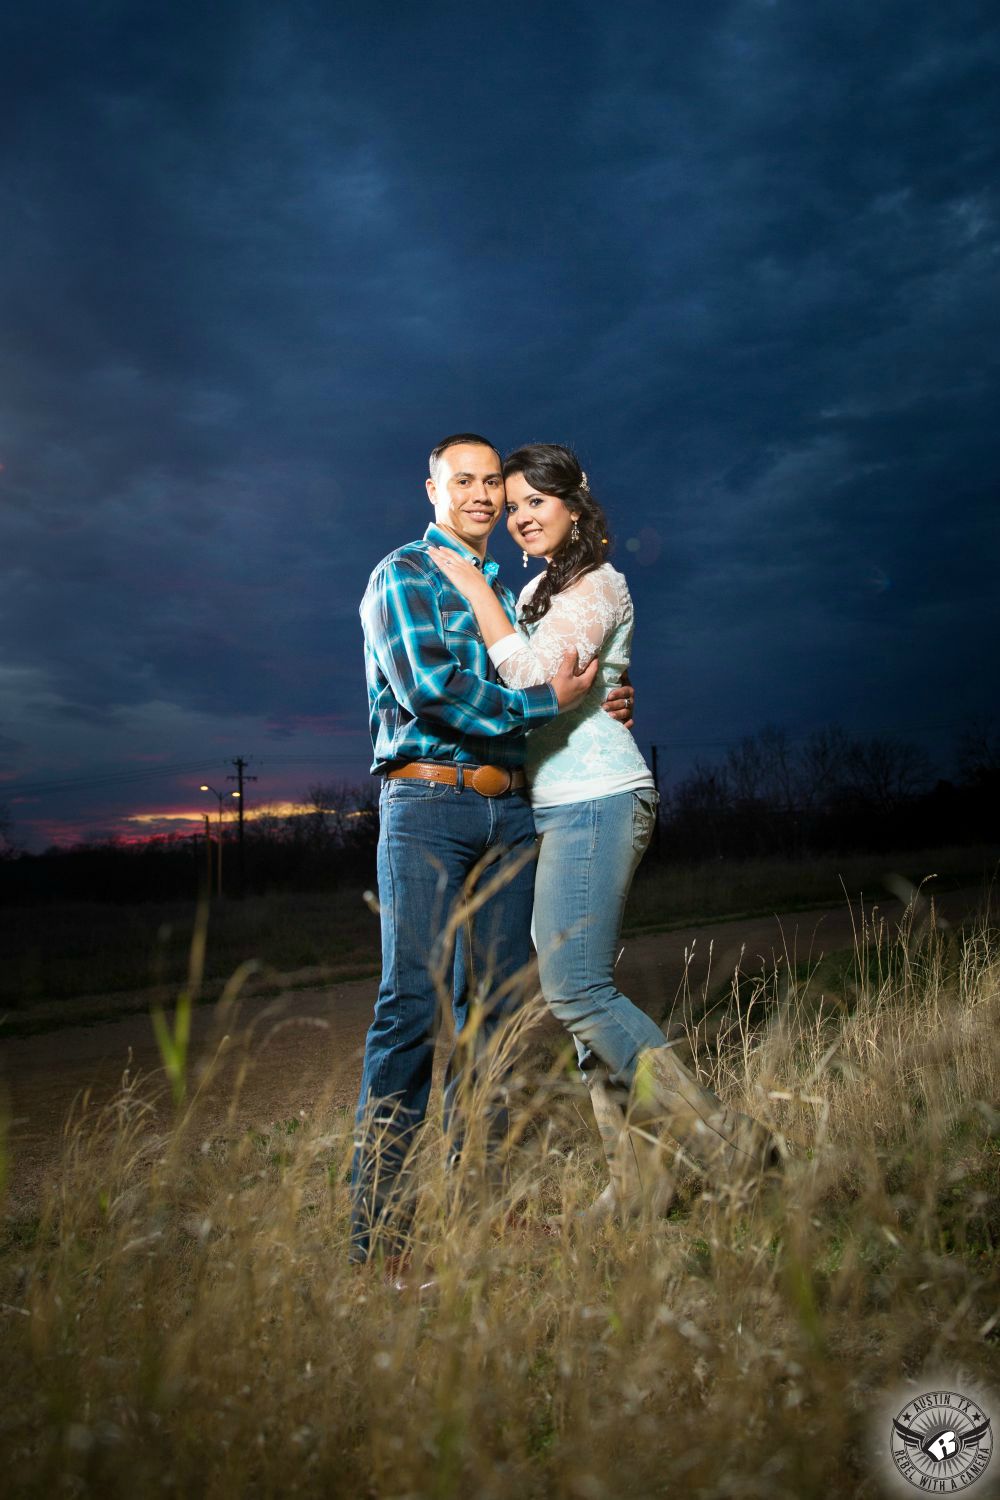 Brunette Latino girl with a curly pony tale and dangling earrings in a white lace blouse, blue jeans and tan cowboy boots embraces a Mexican guy with short black hair wearing an aqua and blue plaid flannel long sleeve shirt and dark blue jeans stand together in a golden grassy field at dusk in front of a big bluish cloudy sky and a hint of orange sunset at Mueller Lake Park in this stunning engagement photo in Austin Texas. 